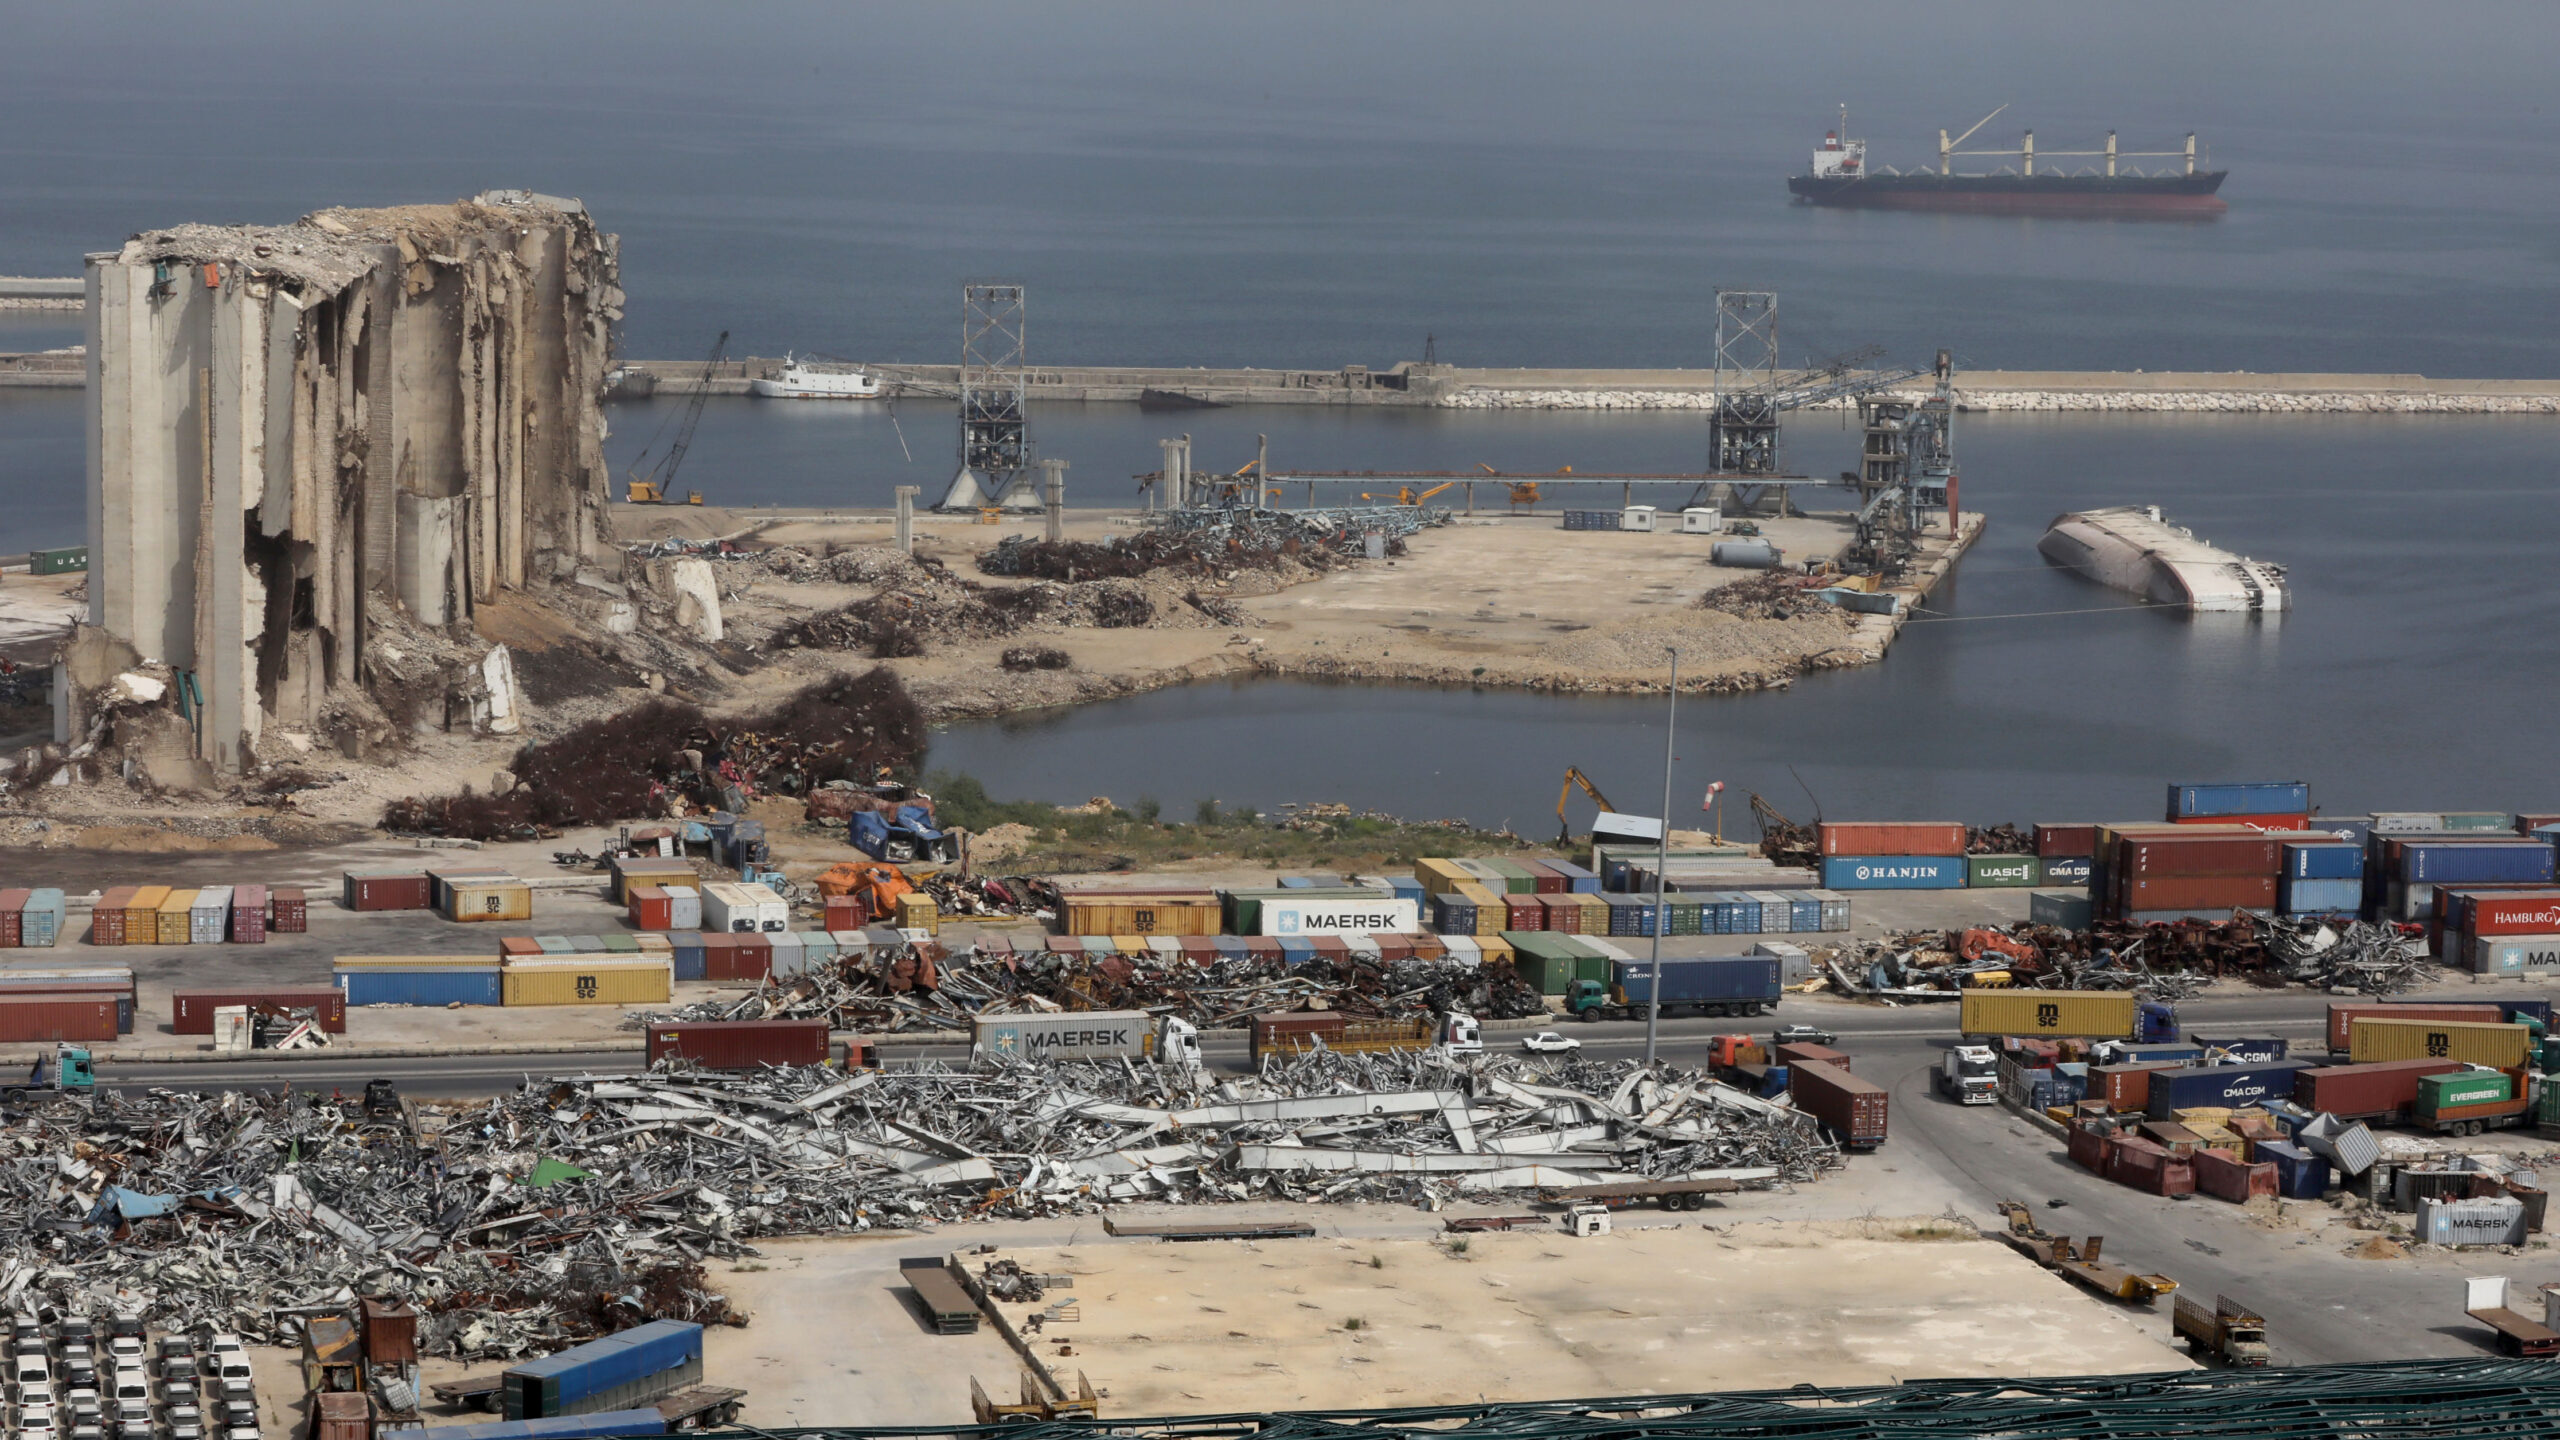 More than 2 years after port explosion, Lebanon’s navy focuses on rebuilding damaged base